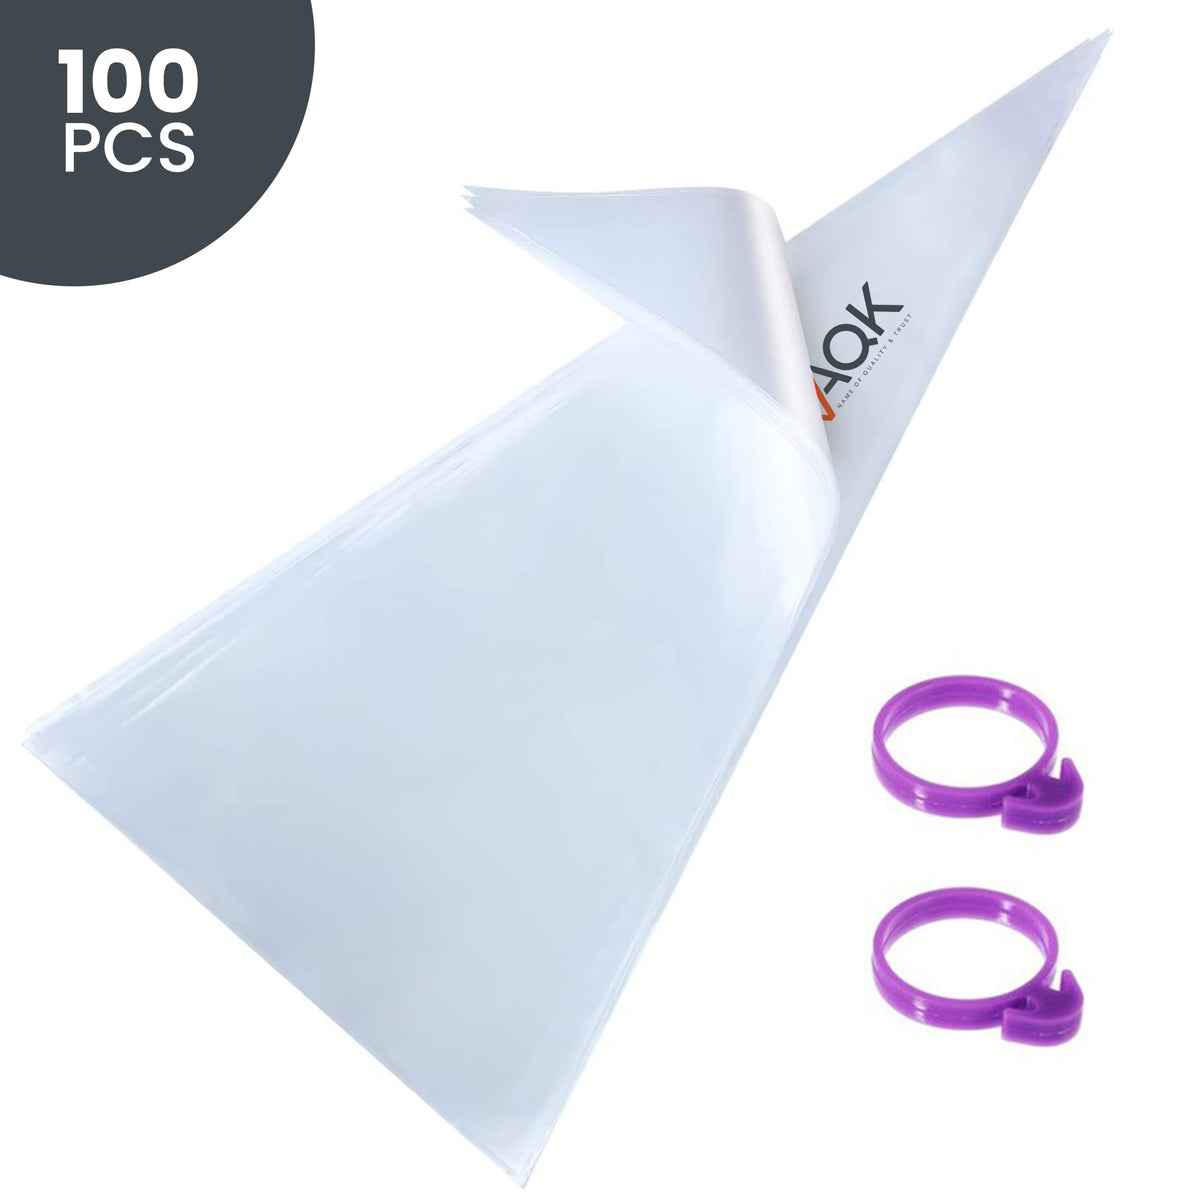 100 pcs Disposable Bags 12 inches for icing piping tips - RFAQK